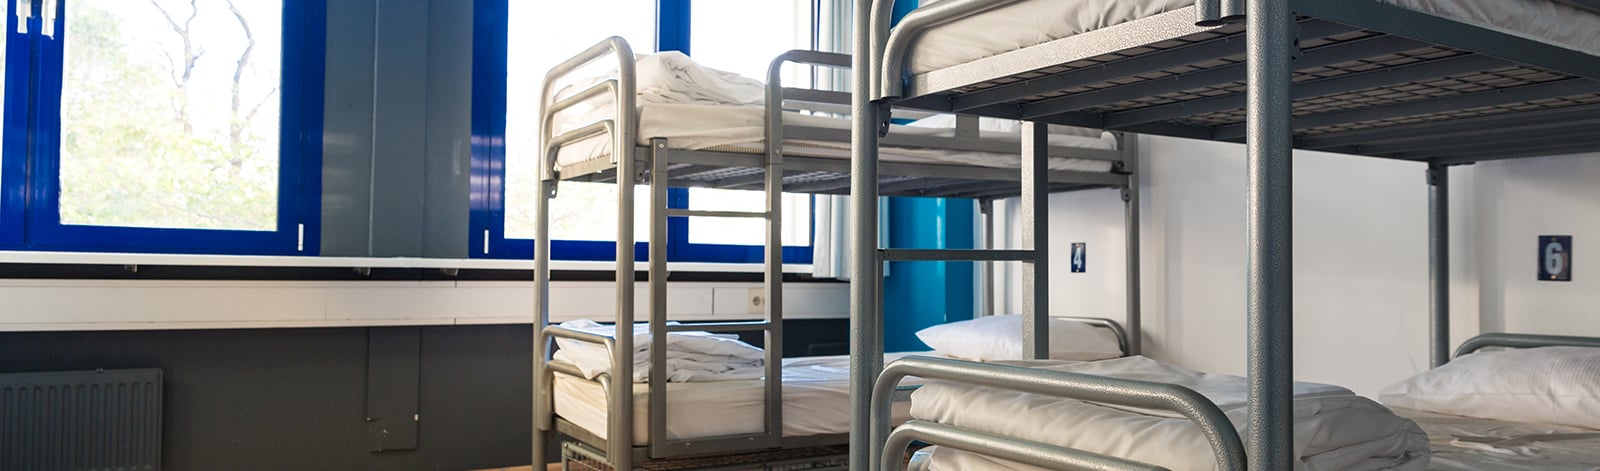 Hostel interior with a set of bunk beds